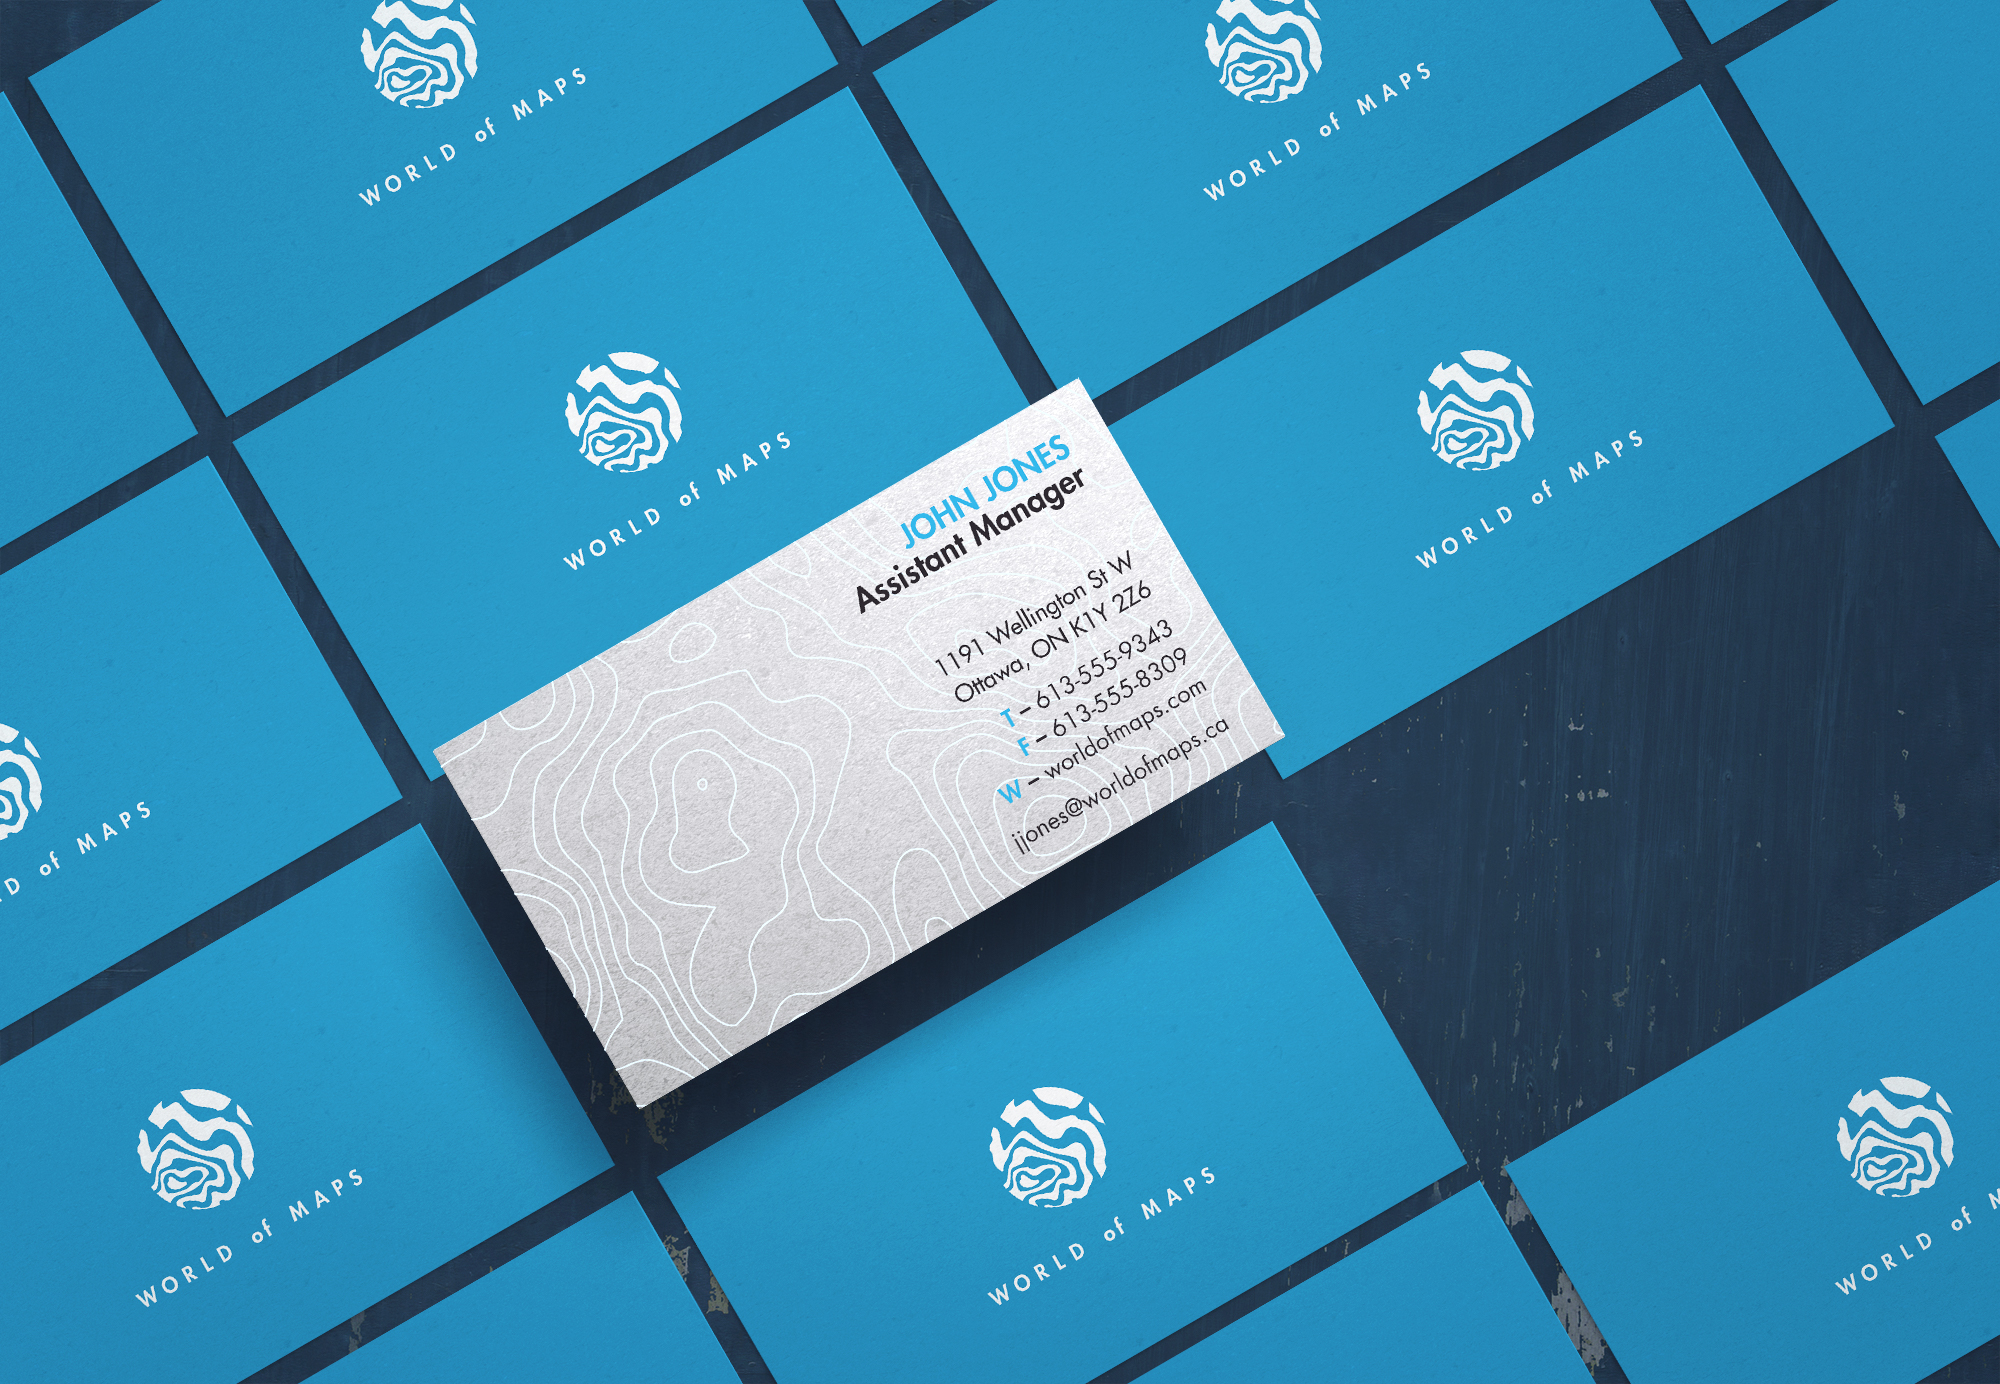 Business cards from the World of Maps Logo Standards Guide